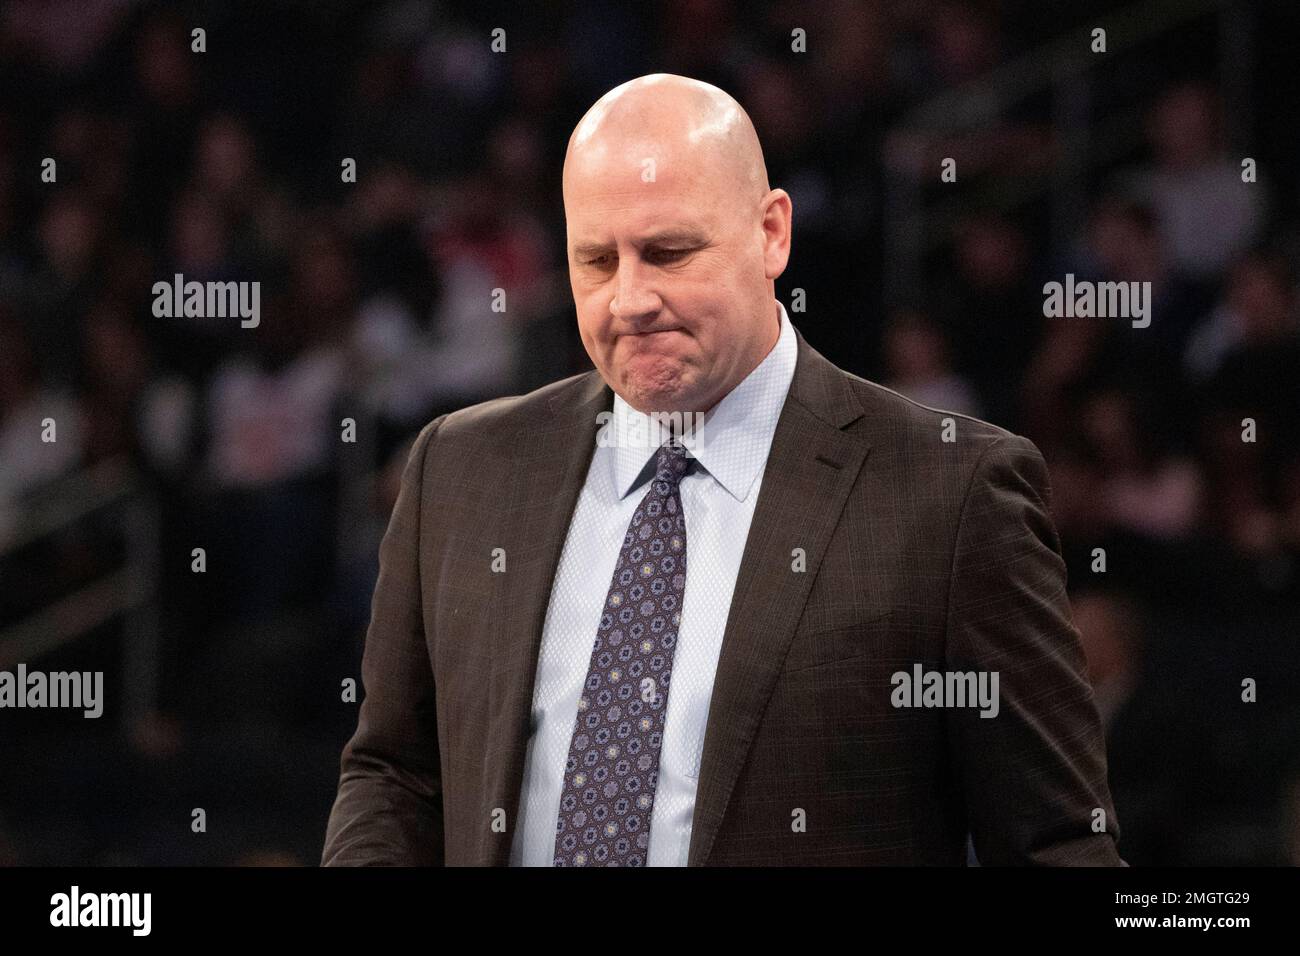 Chicago Bulls head coach Jim Boylen prepares for a team timeout during the  first half of an NBA basketball game against the New York Knicks, Saturday,  Feb. 29, 2020 in New York. (